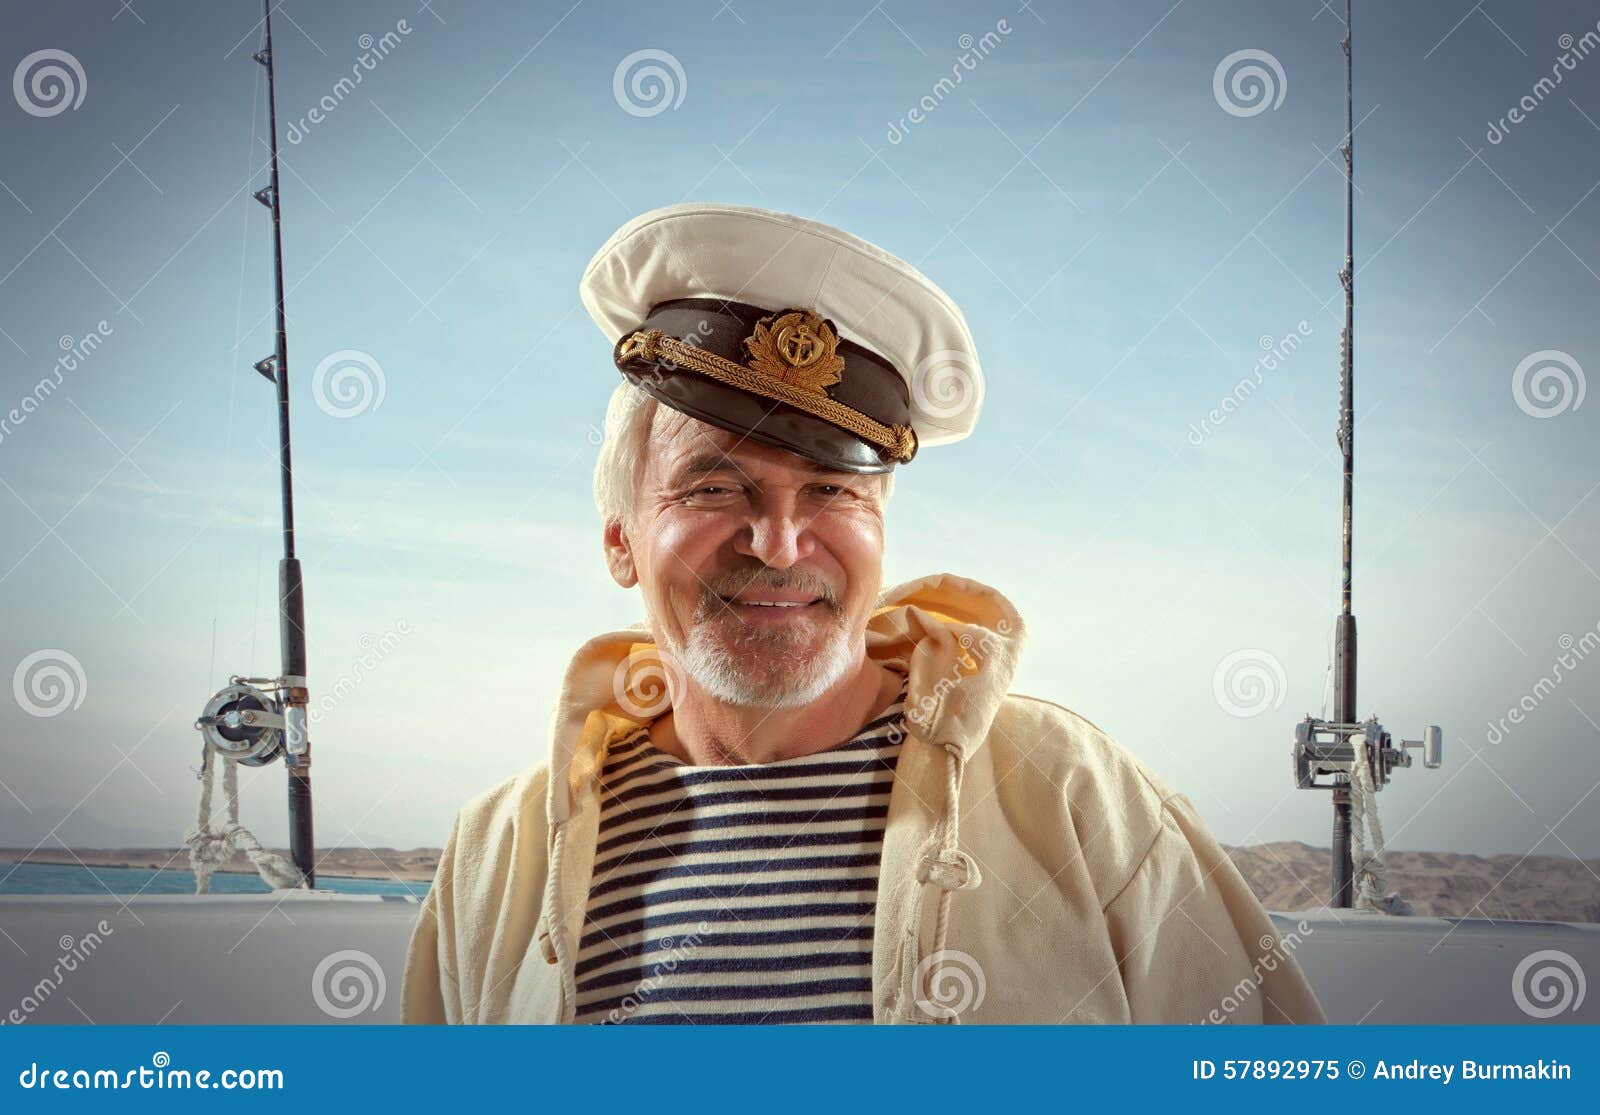 Captain stock image. Image of shipping, sailor, north - 57892975